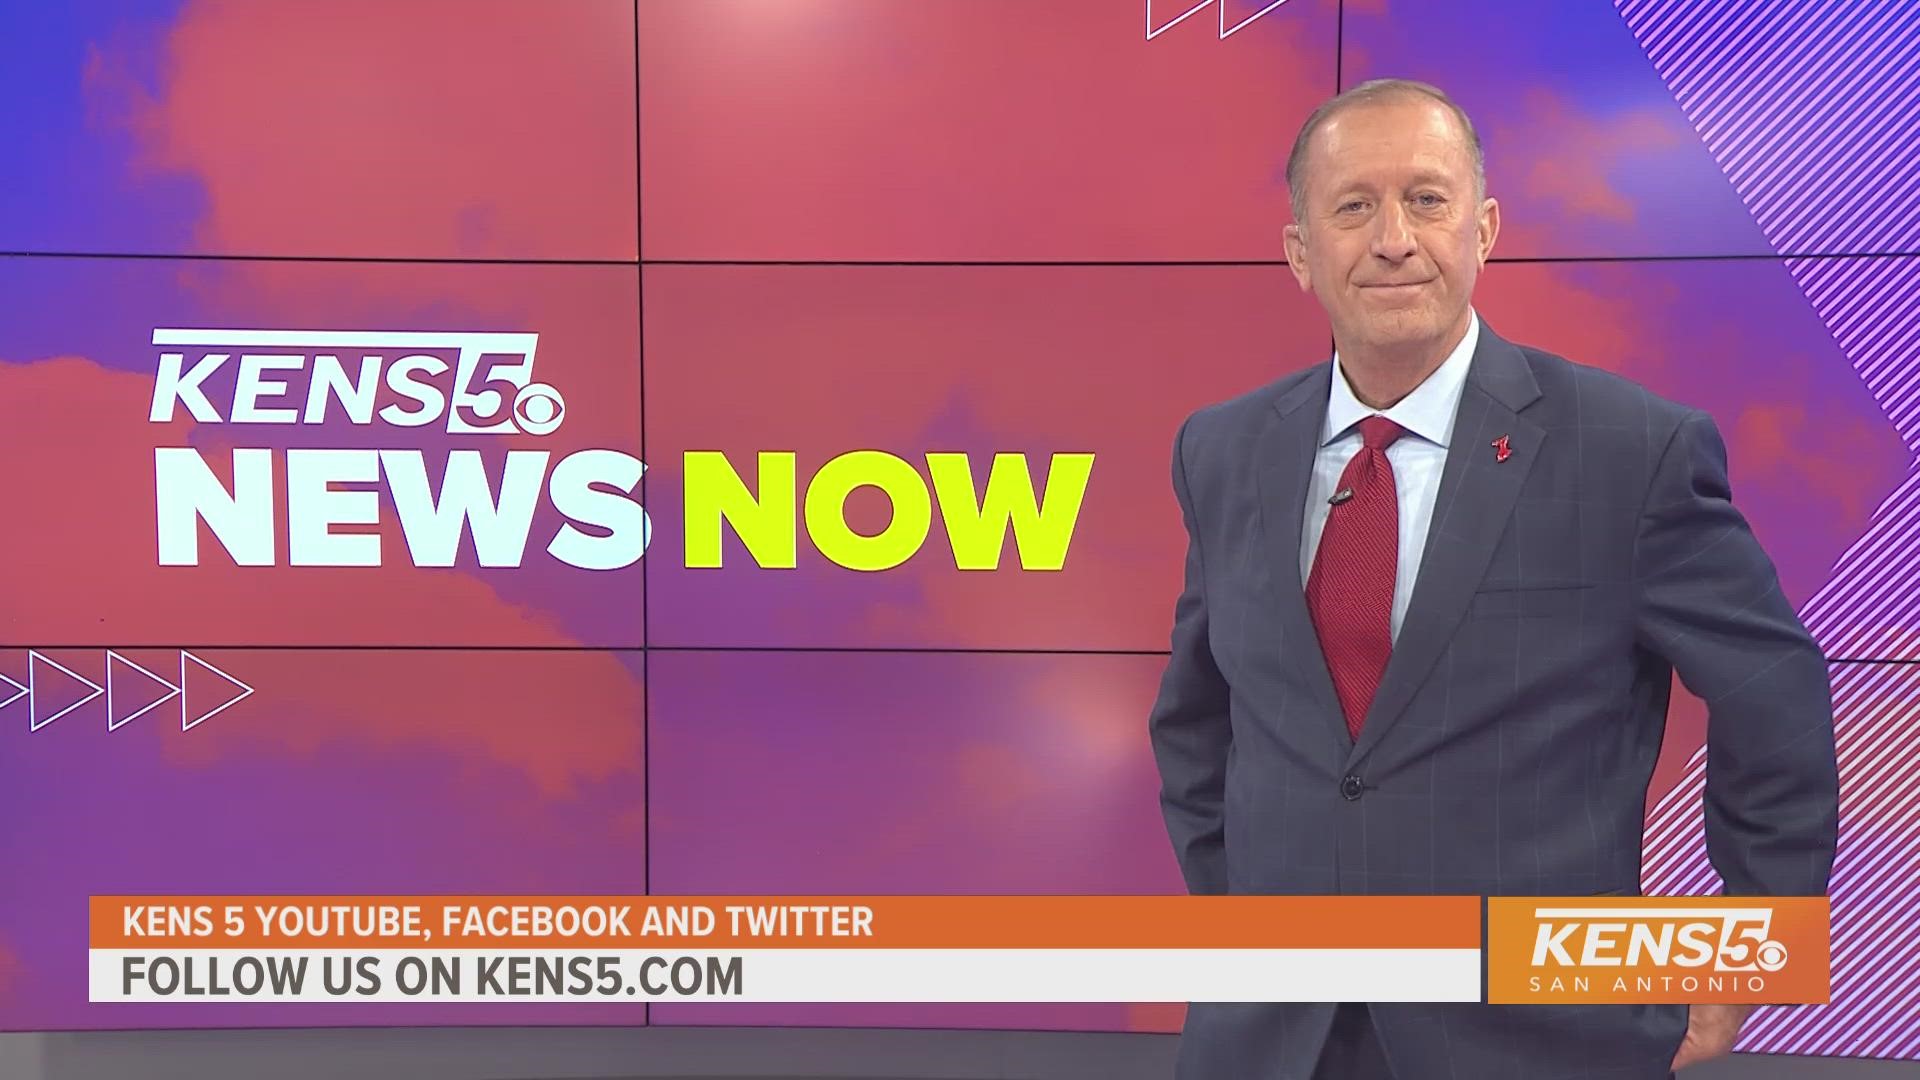 Follow us here to get the latest top headlines with the KENS 5 anchor team every weekday.